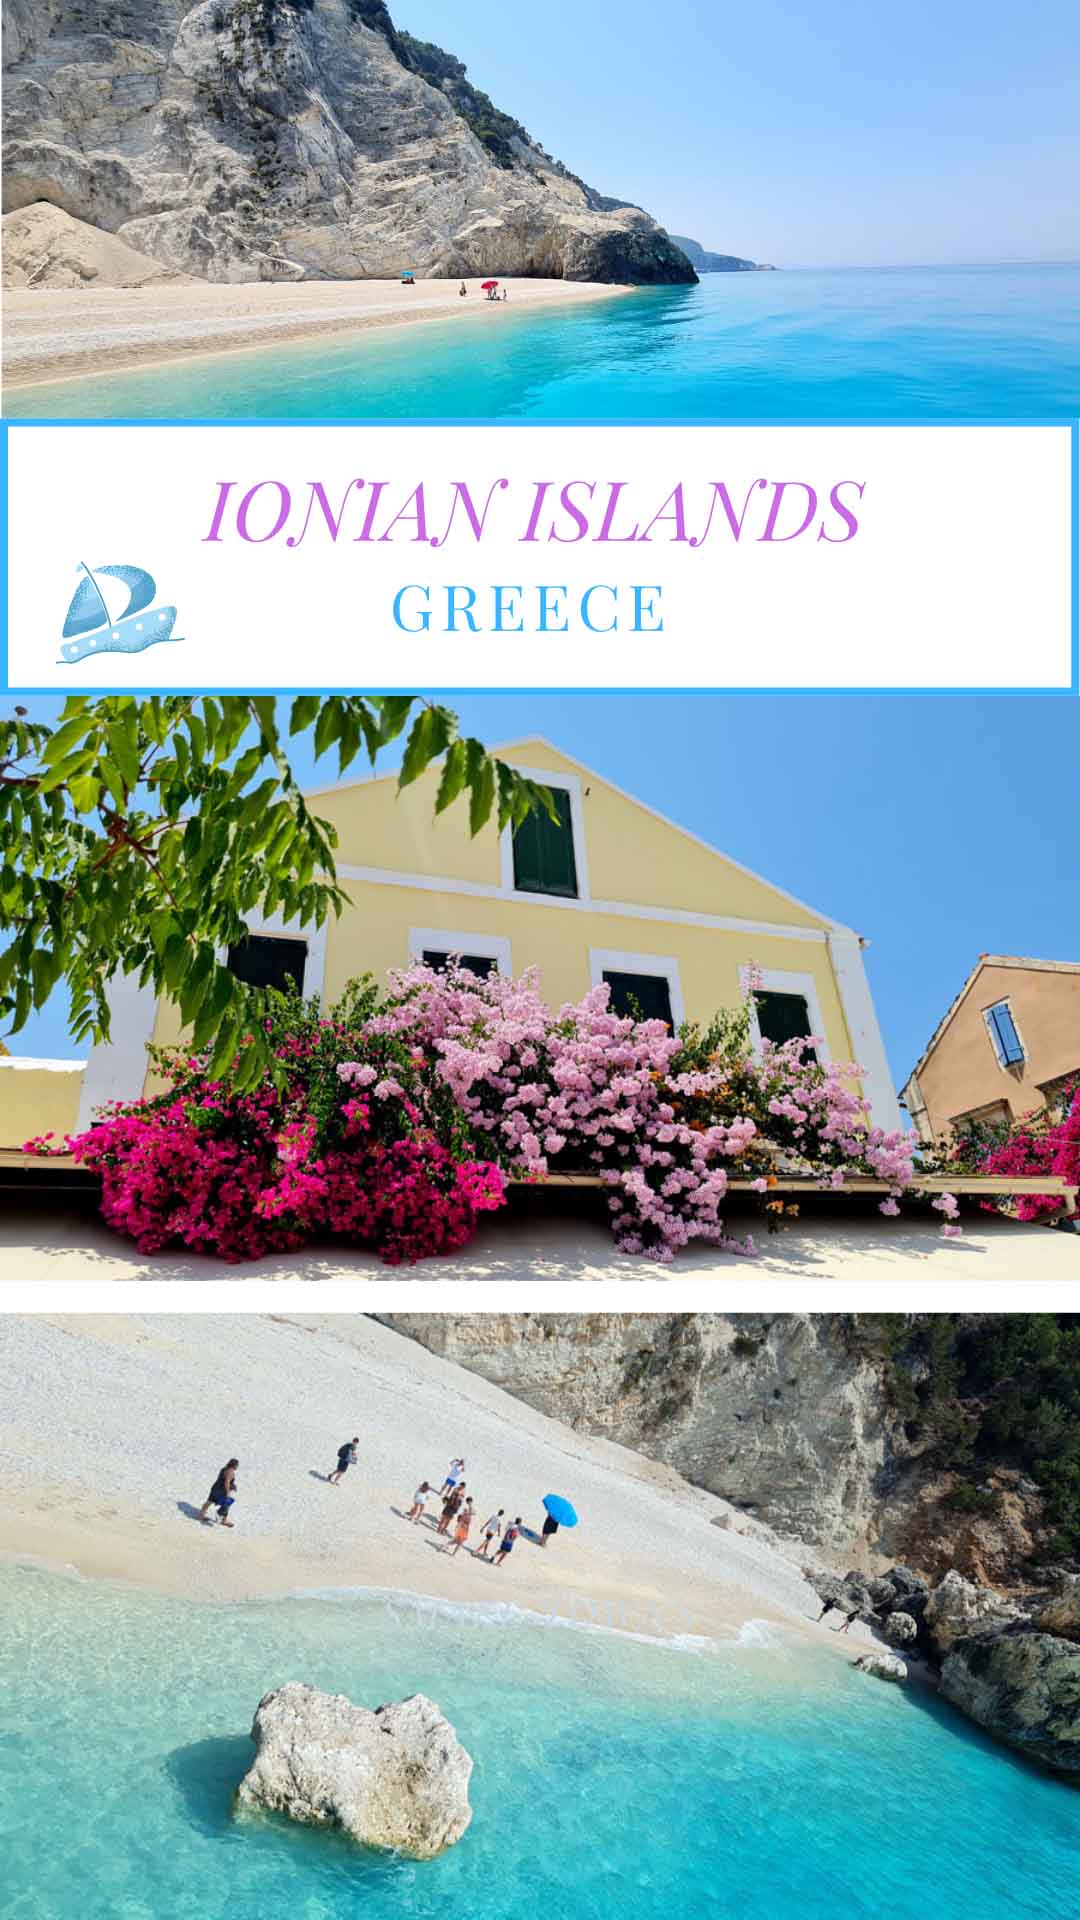 Greece Glimpses of the World